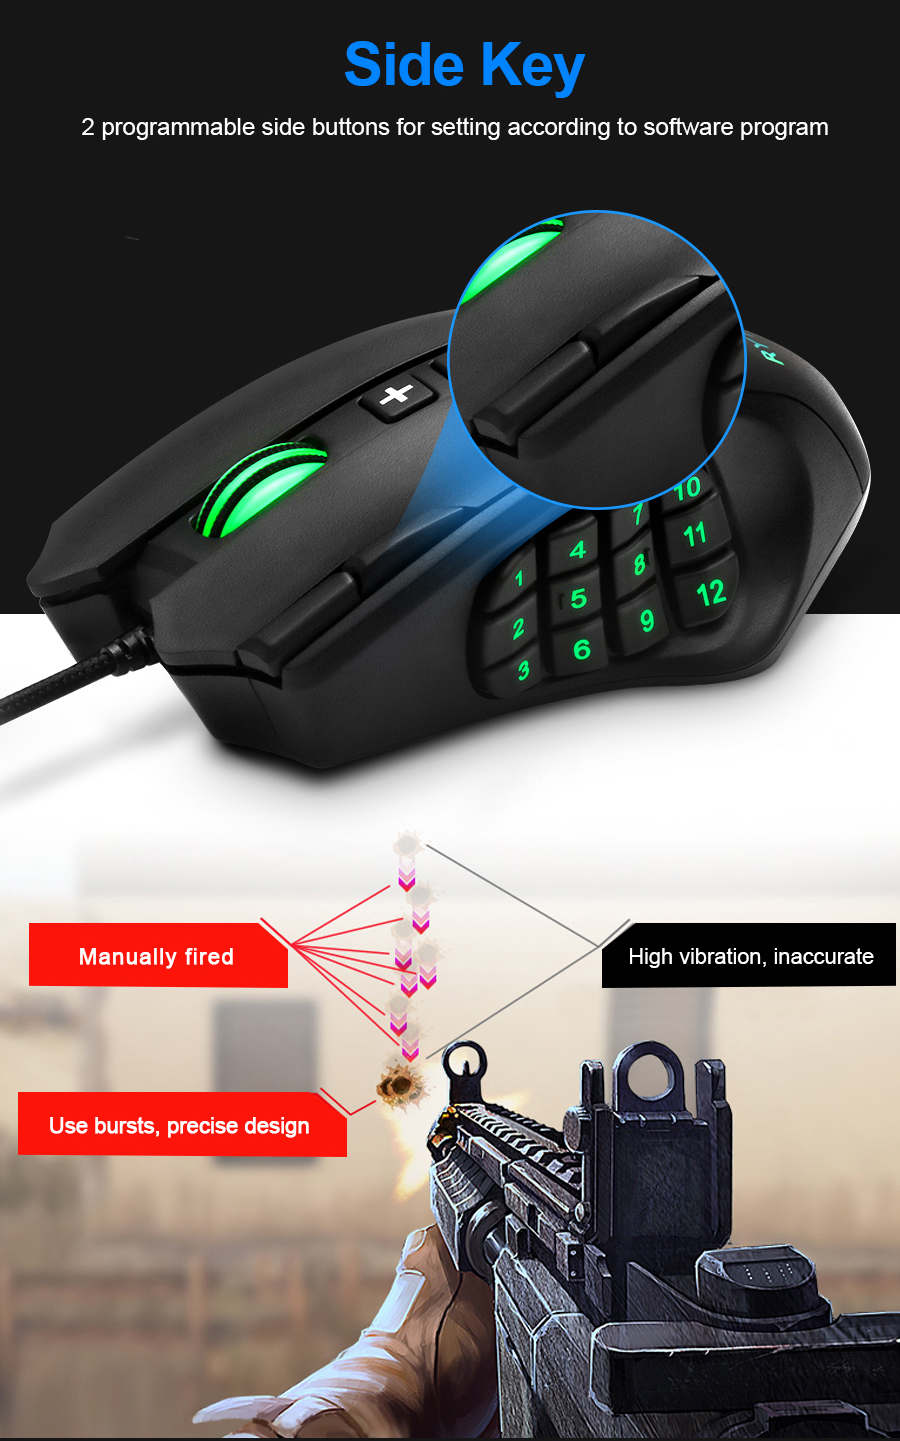 Rocketek R6 USB Wired Multi-Buttons Gaming Mouse 16400DPI 16 Buttons Laser Programmable Game Mice with 5 Backlight Modes Ergonomic Mouse for Laptop Computer PC